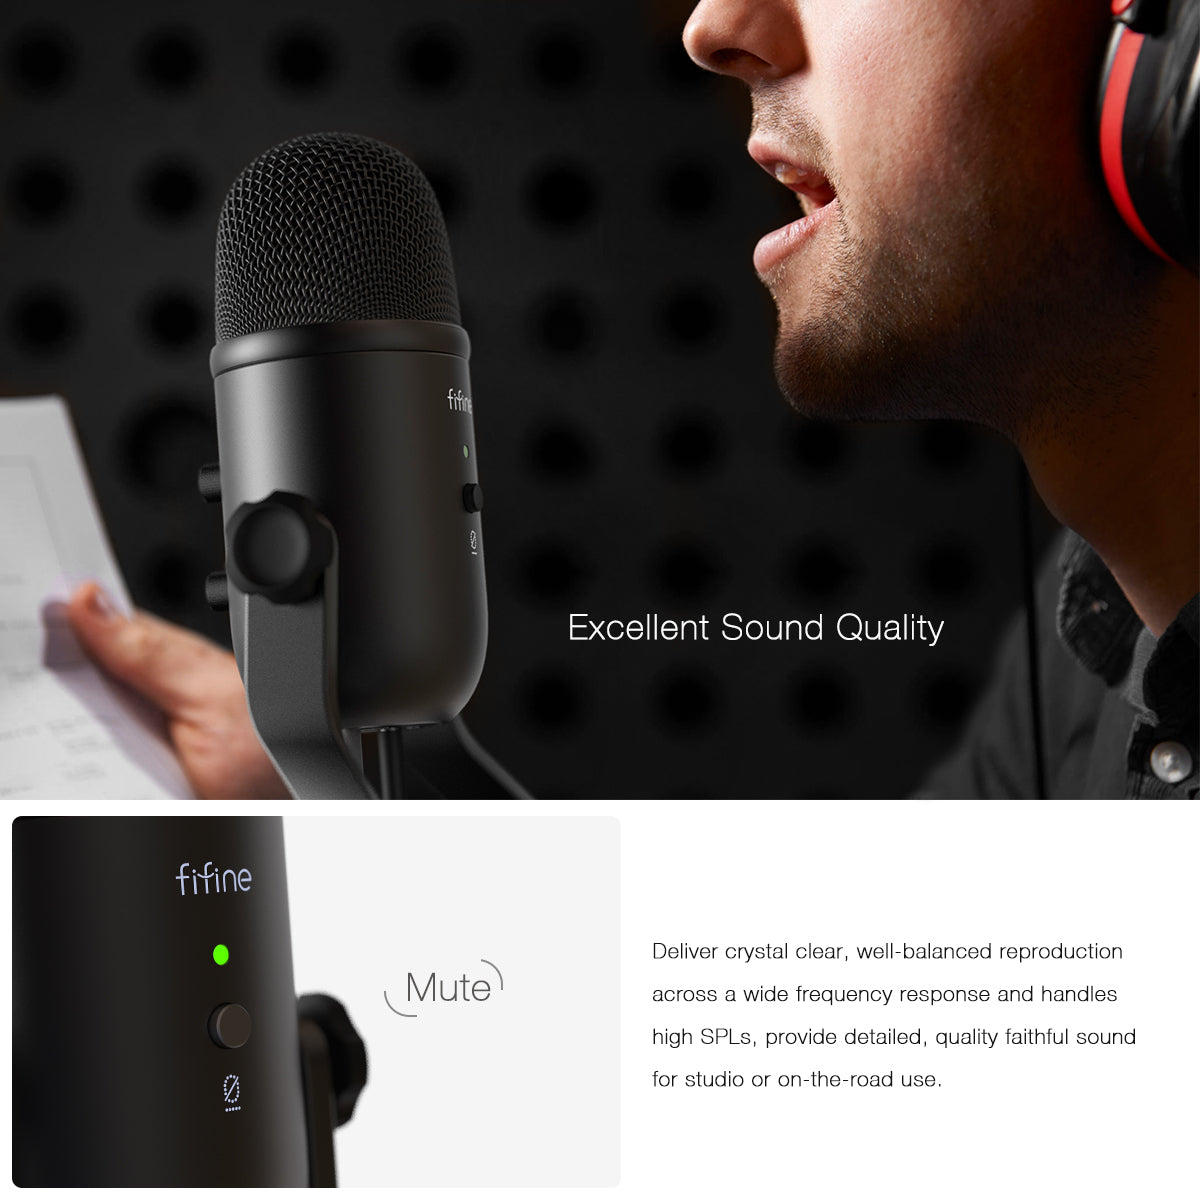 FIFINE K678 Studio USB Mic with A Live Monitoring, Gain Controls, A Mute Button for Podcasting